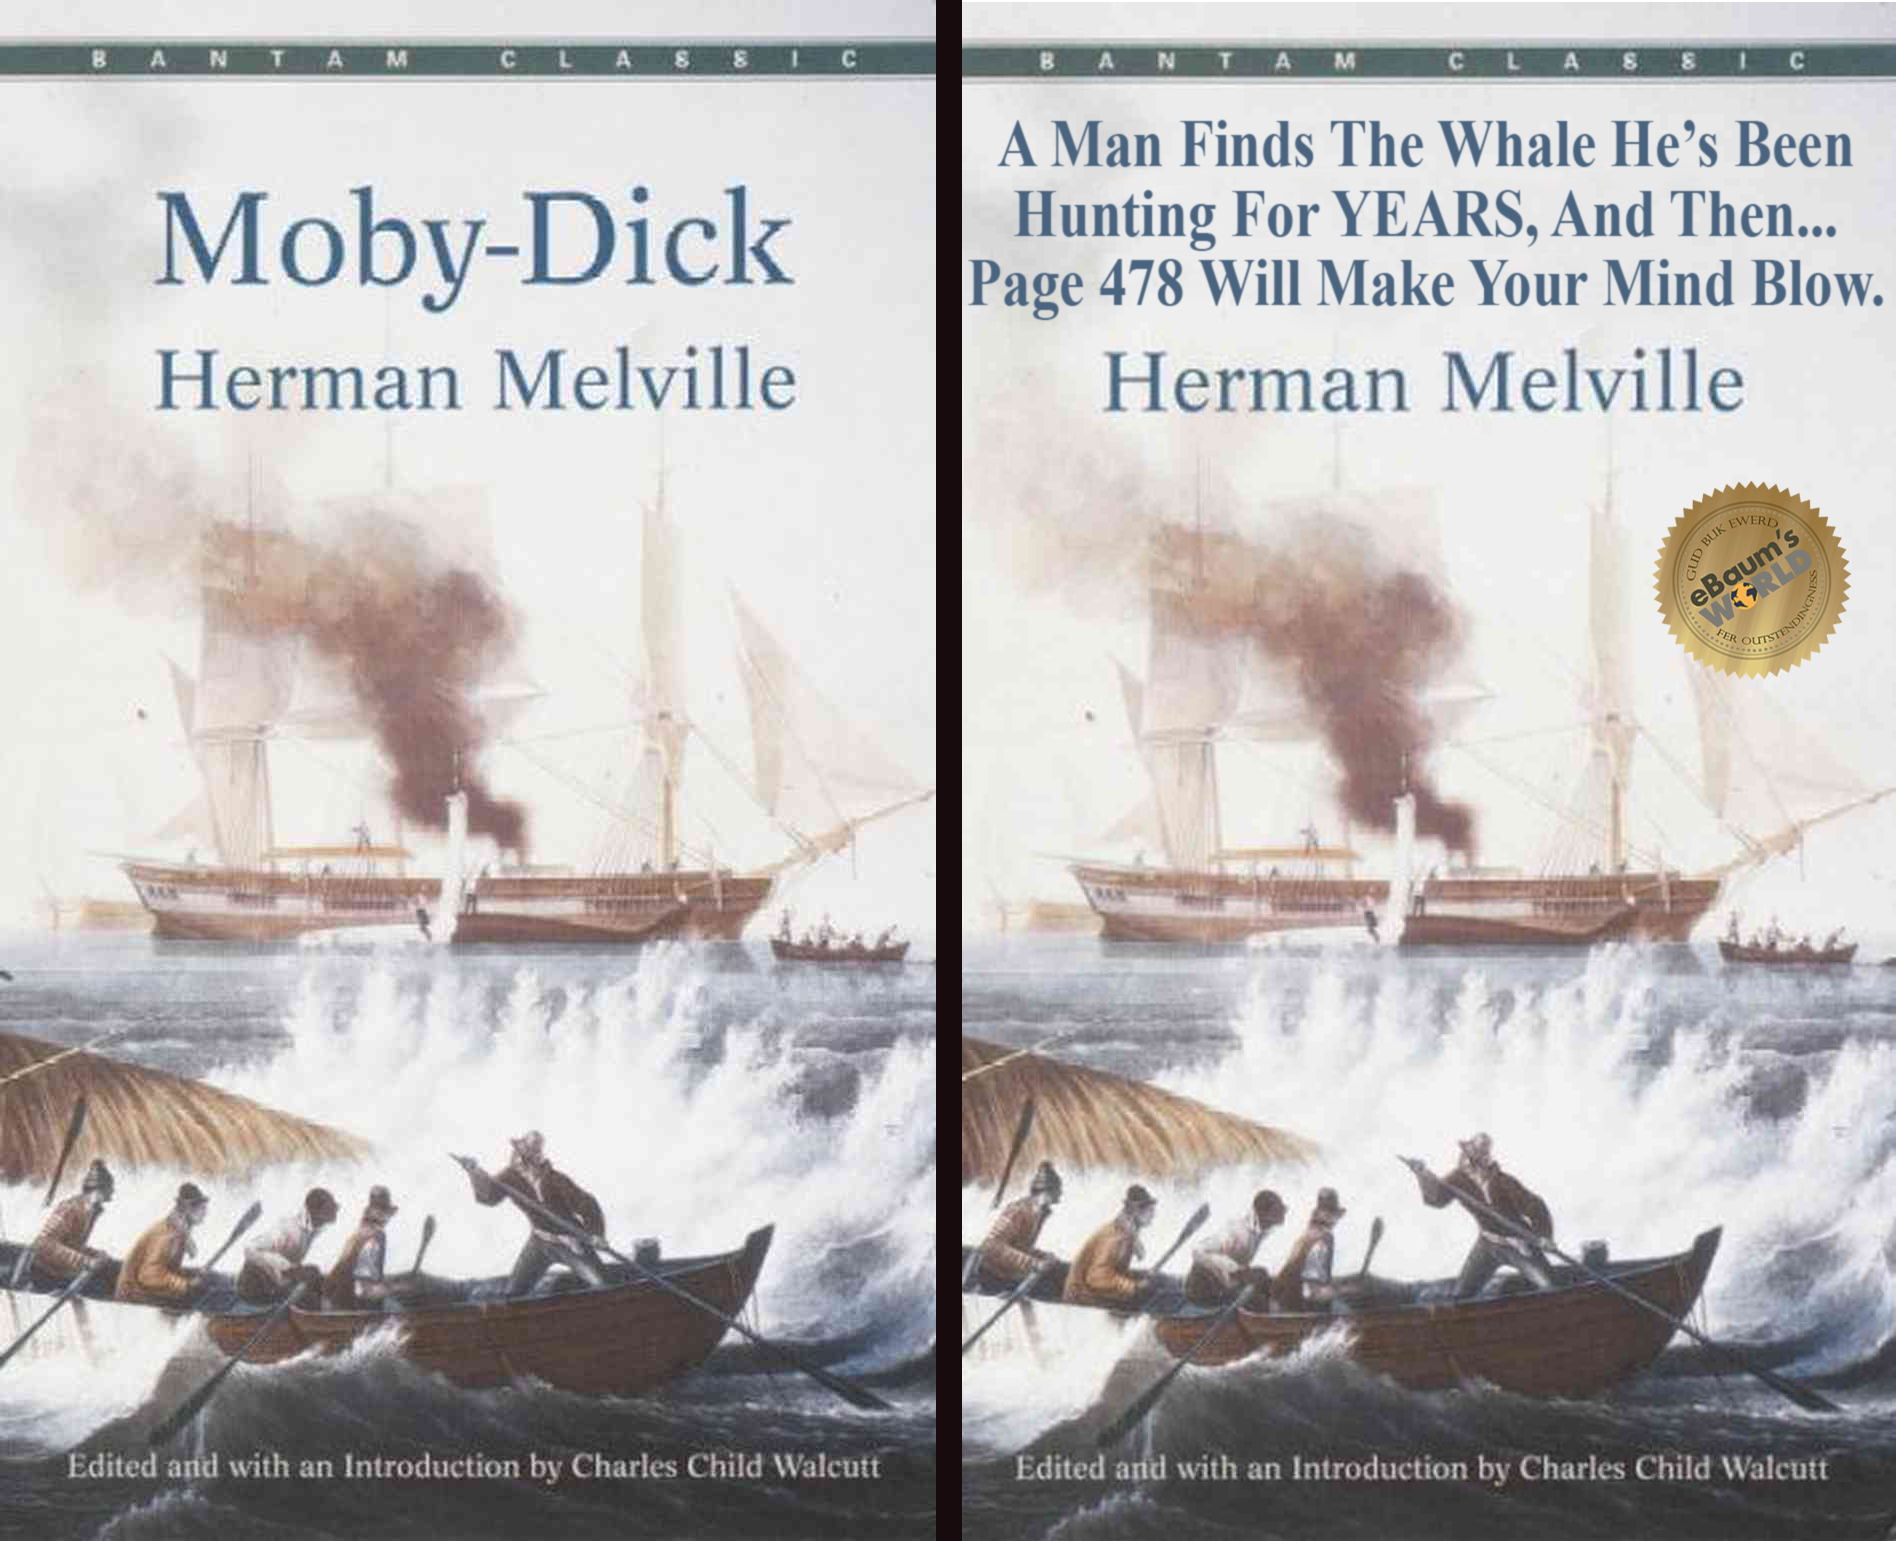 Bantam Claedic Anta Mclablc MobyDick Herman Melville A Man Finds The Whale He's Been Hunting For Years, And Then... Page 478 Will Make Your Mind Blow. Herman Melville Edited and with an Introduction by Charles Child Waleutt Edited and with an introduction